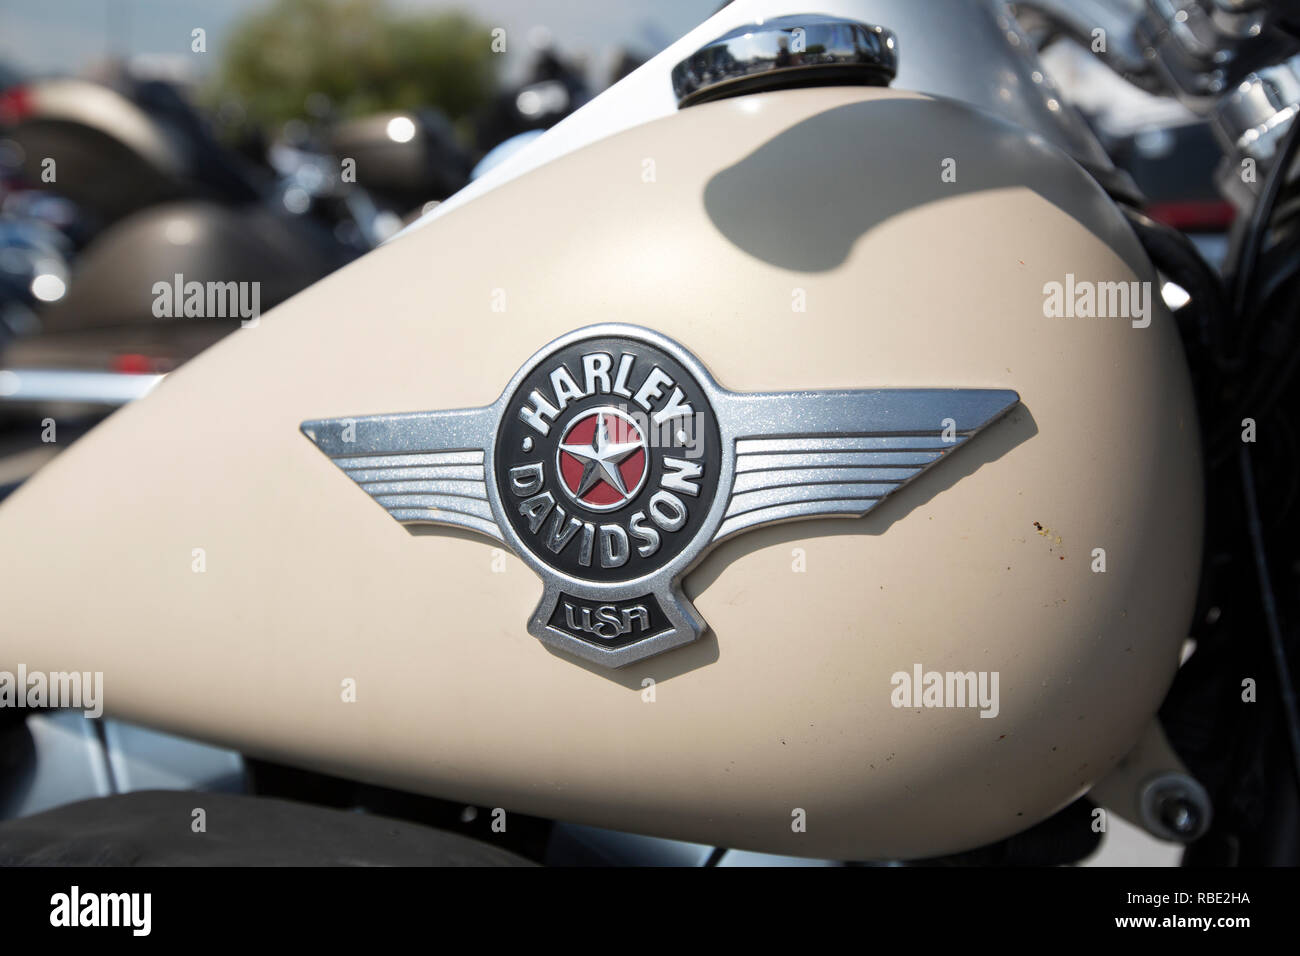 Harley Davidson Gas Tank High Resolution Stock Photography And Images Alamy